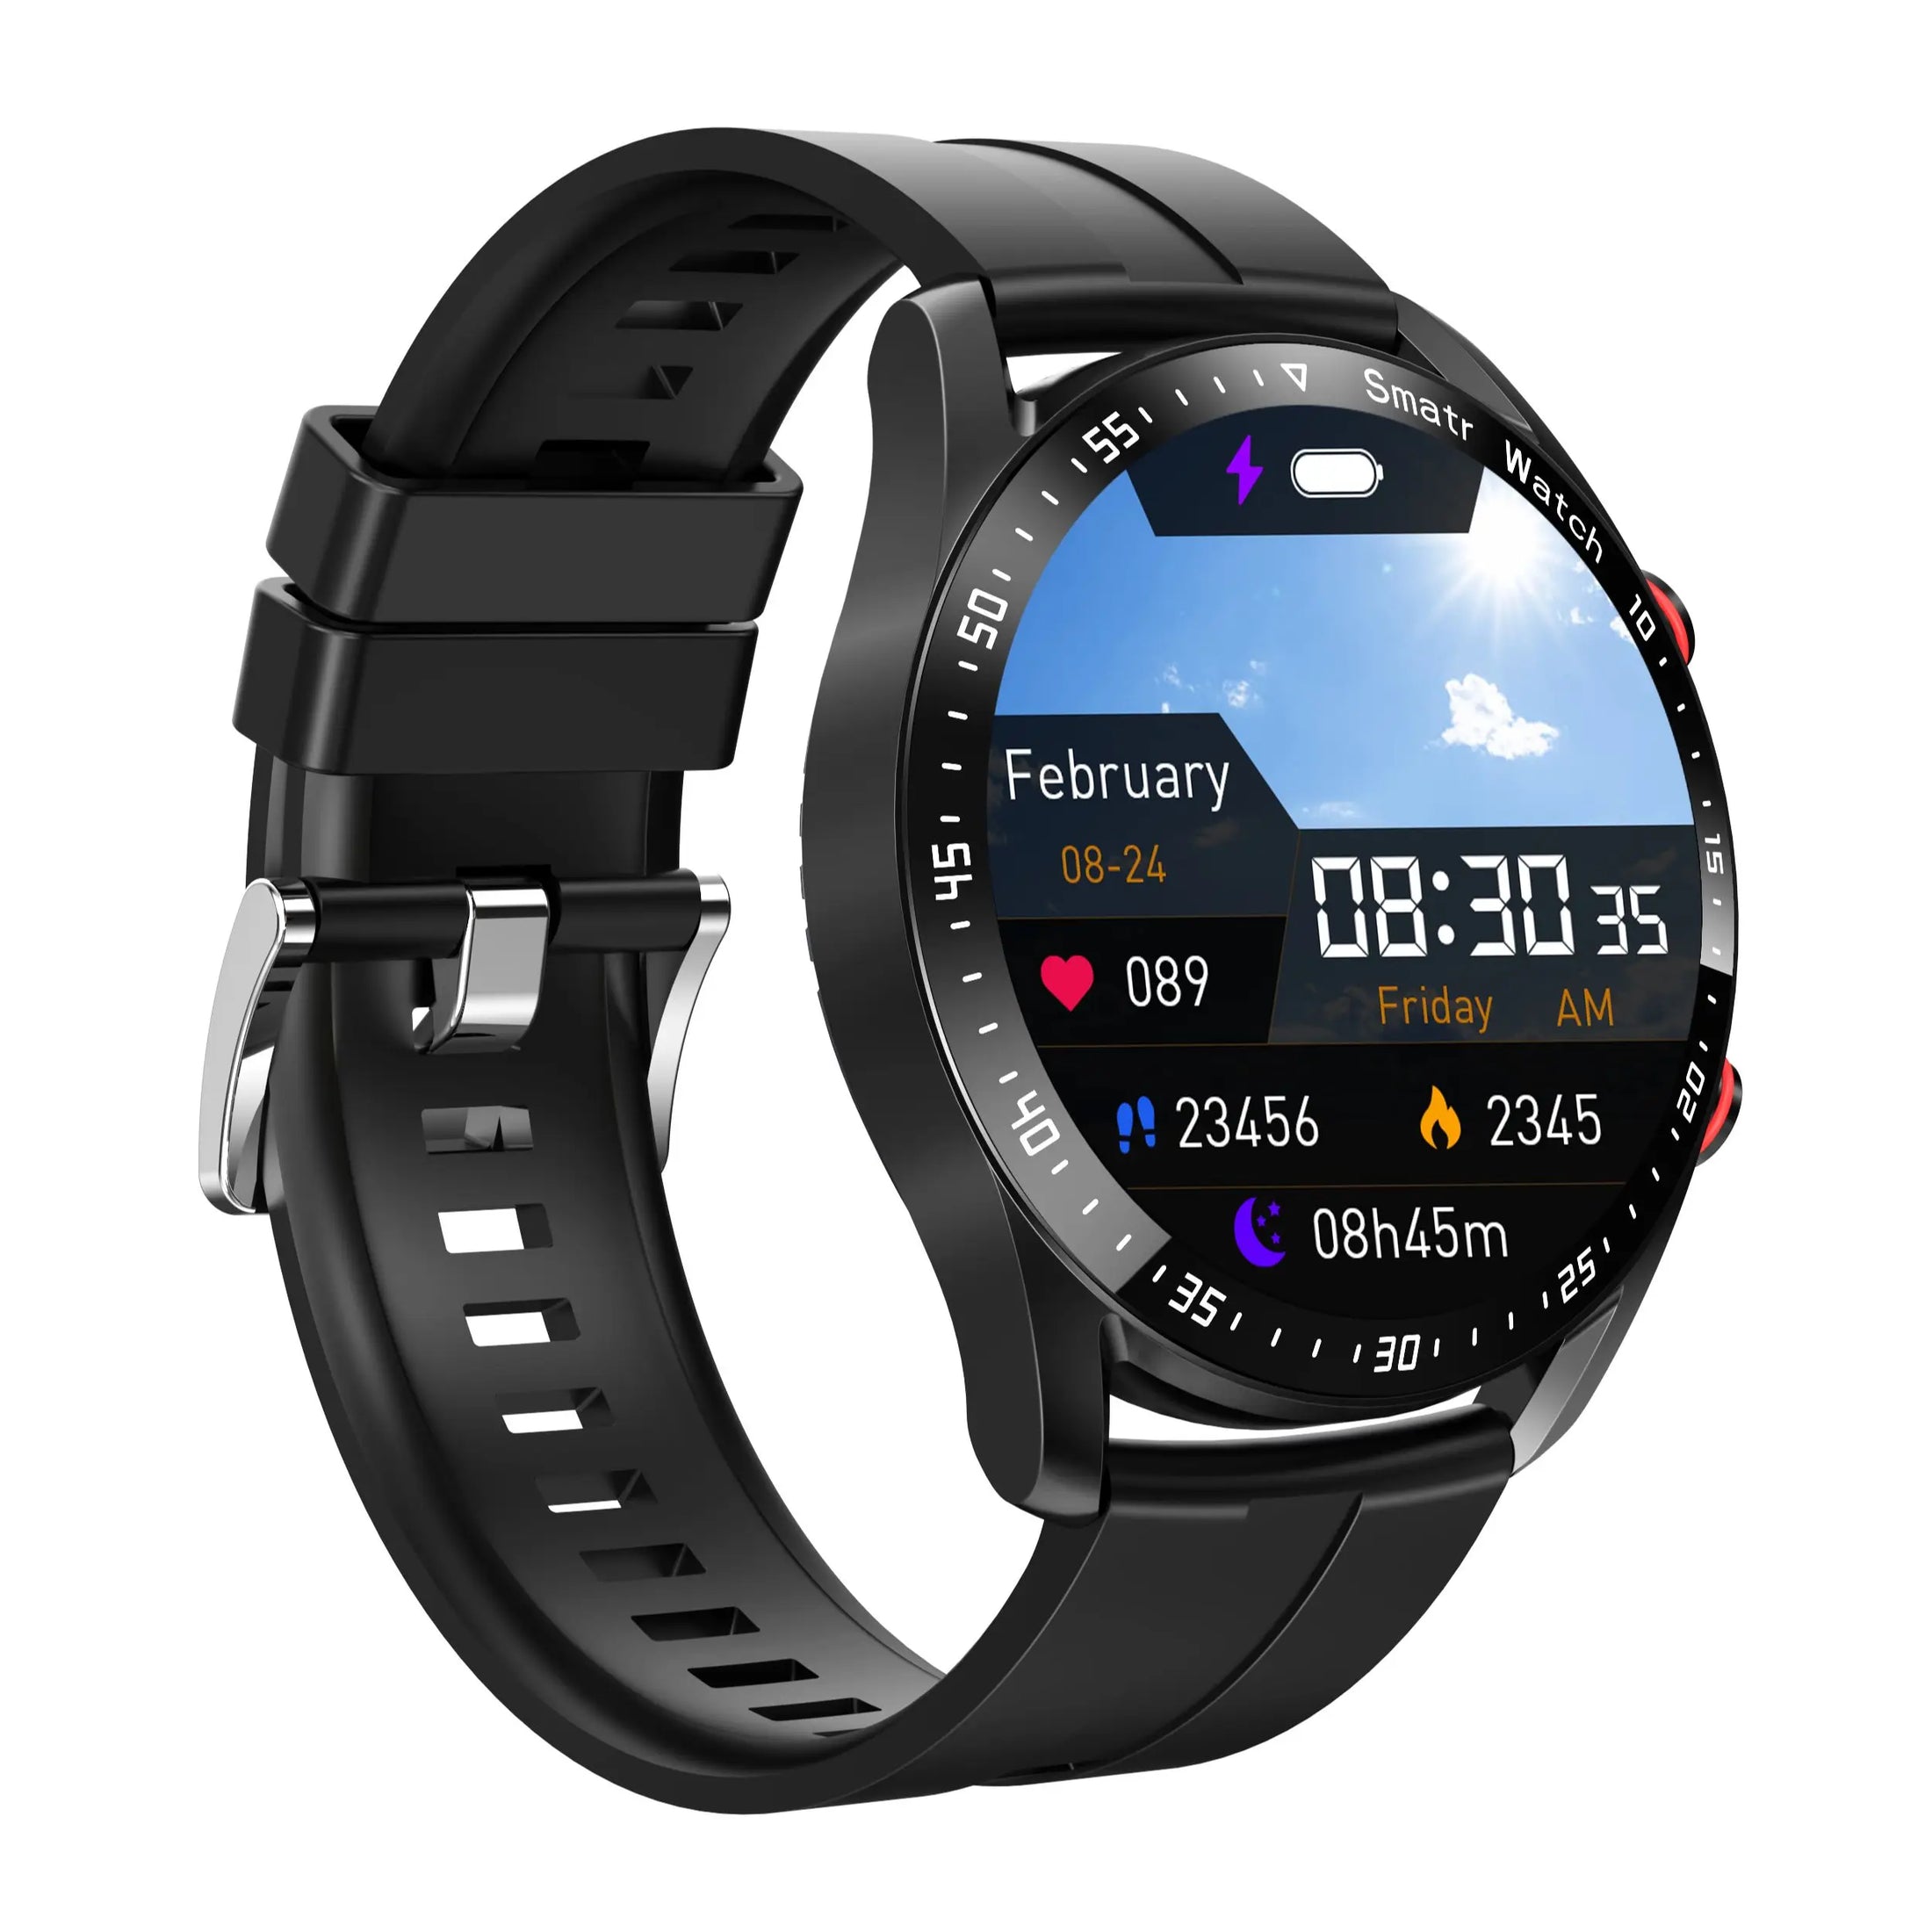 New 2023 ECG+PPG Smart Watch Bluetooth Call Music player Man Watch Sports Waterproof Luxury Smartwatch For Android ios